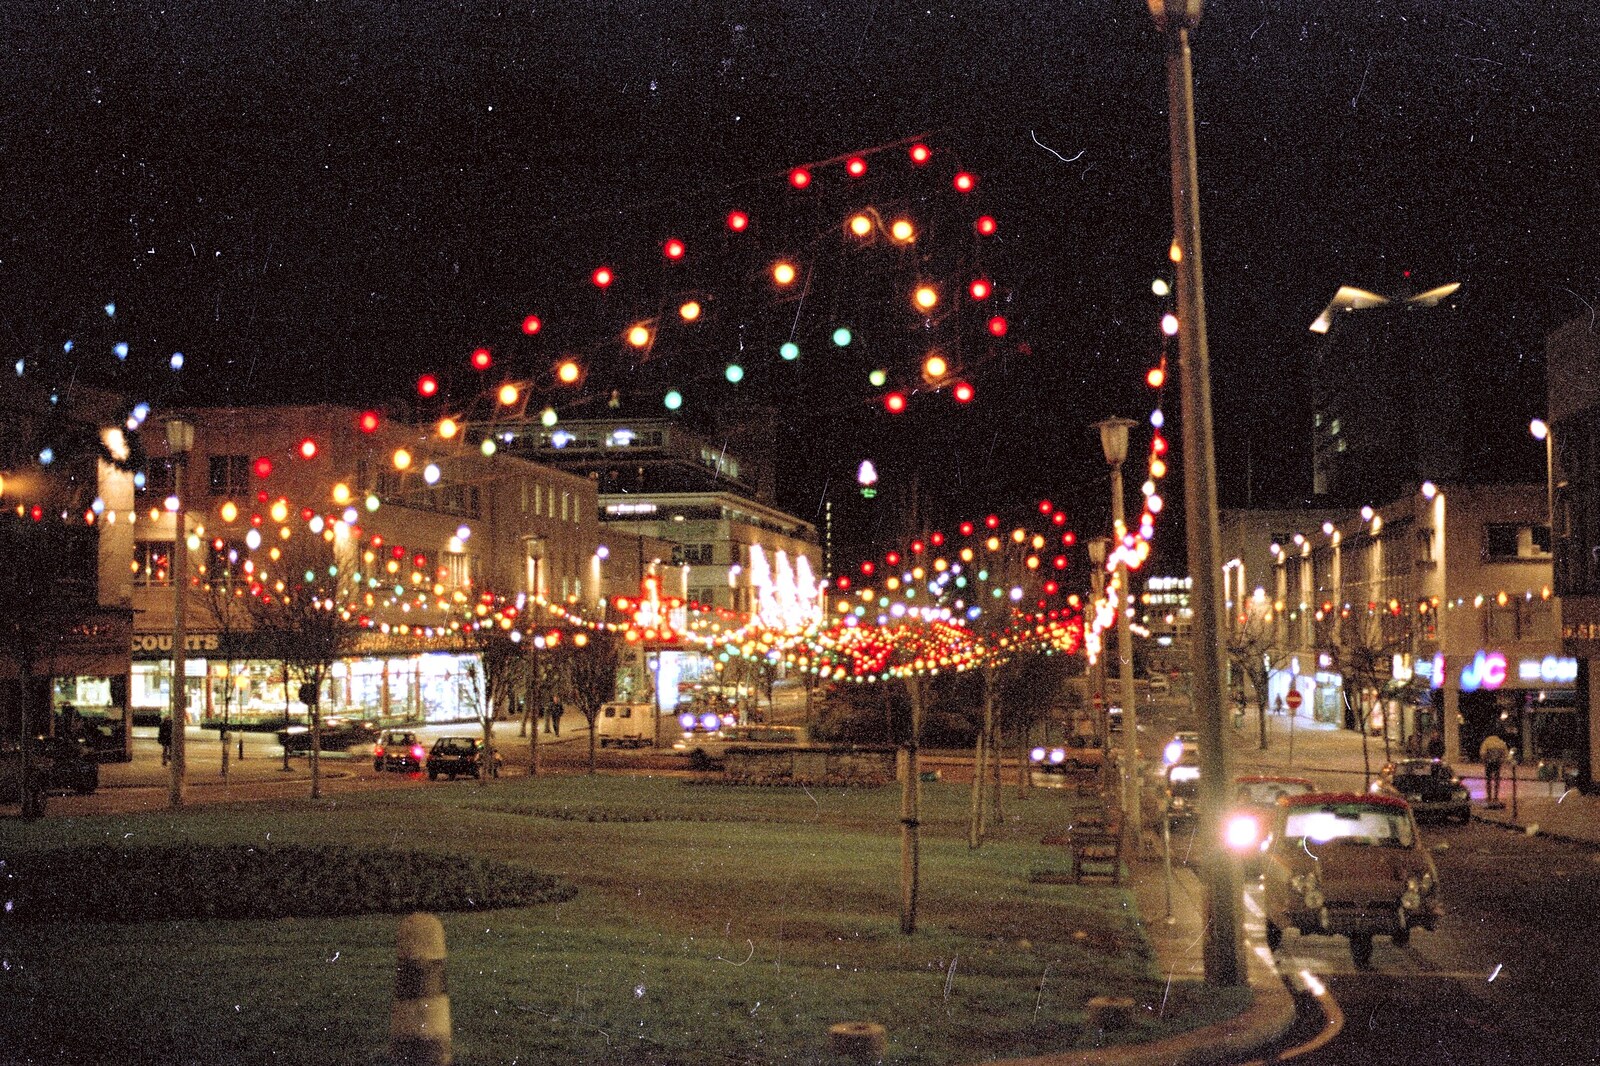 Christmas lights in Plymouth, on Armada Way from A Bit of Bracken Way Pre-Christmas, Walkford, Dorset - 24th December 1986